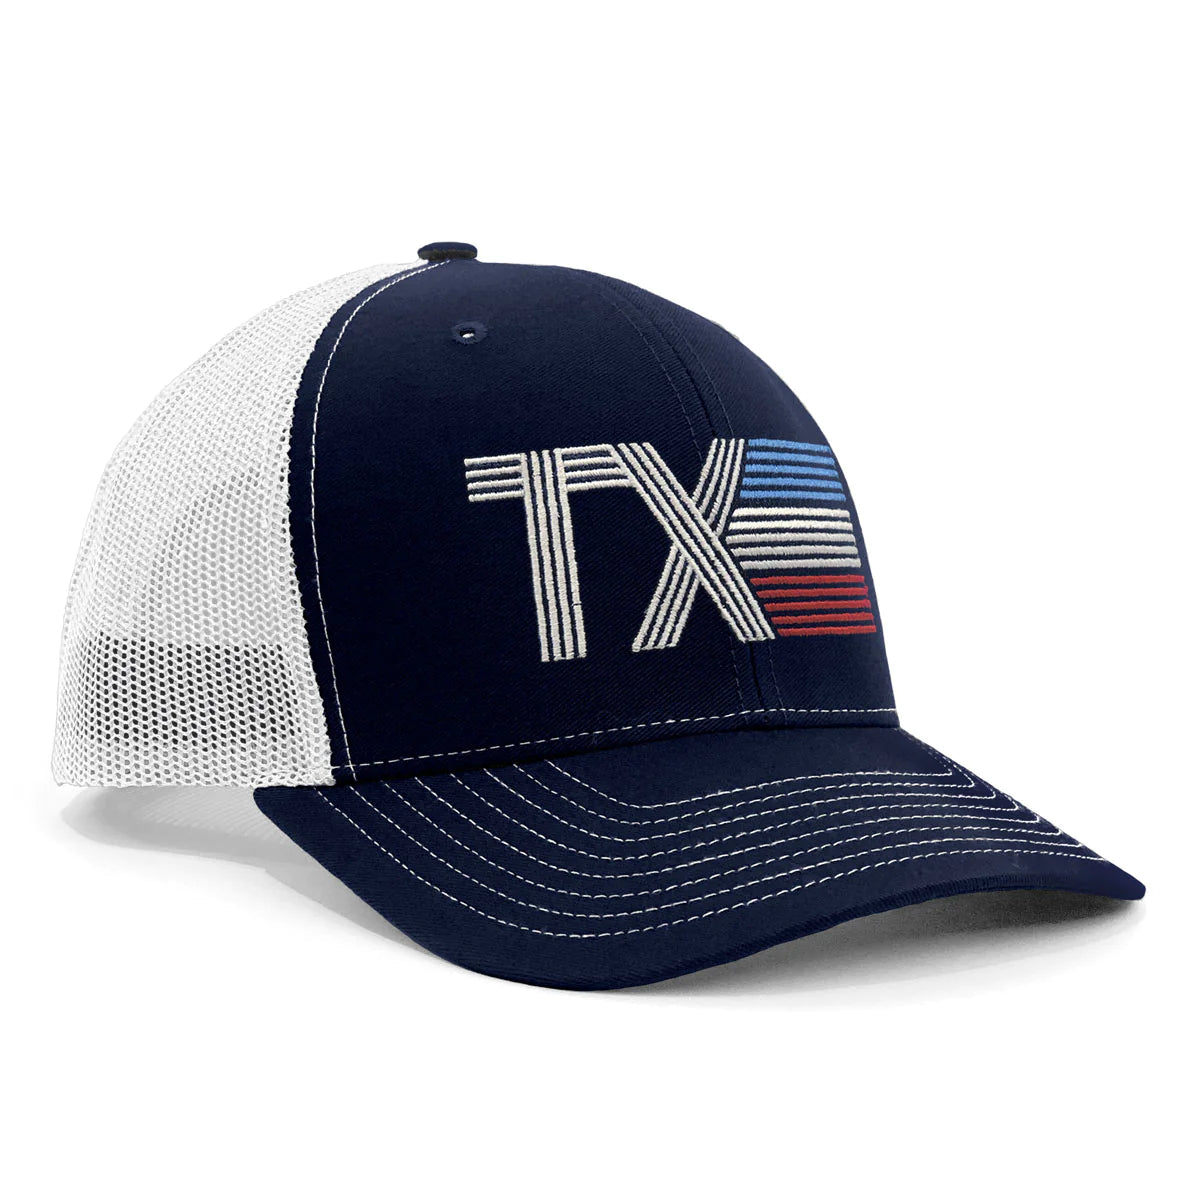 Texas Striped Hat - KC Outfitter